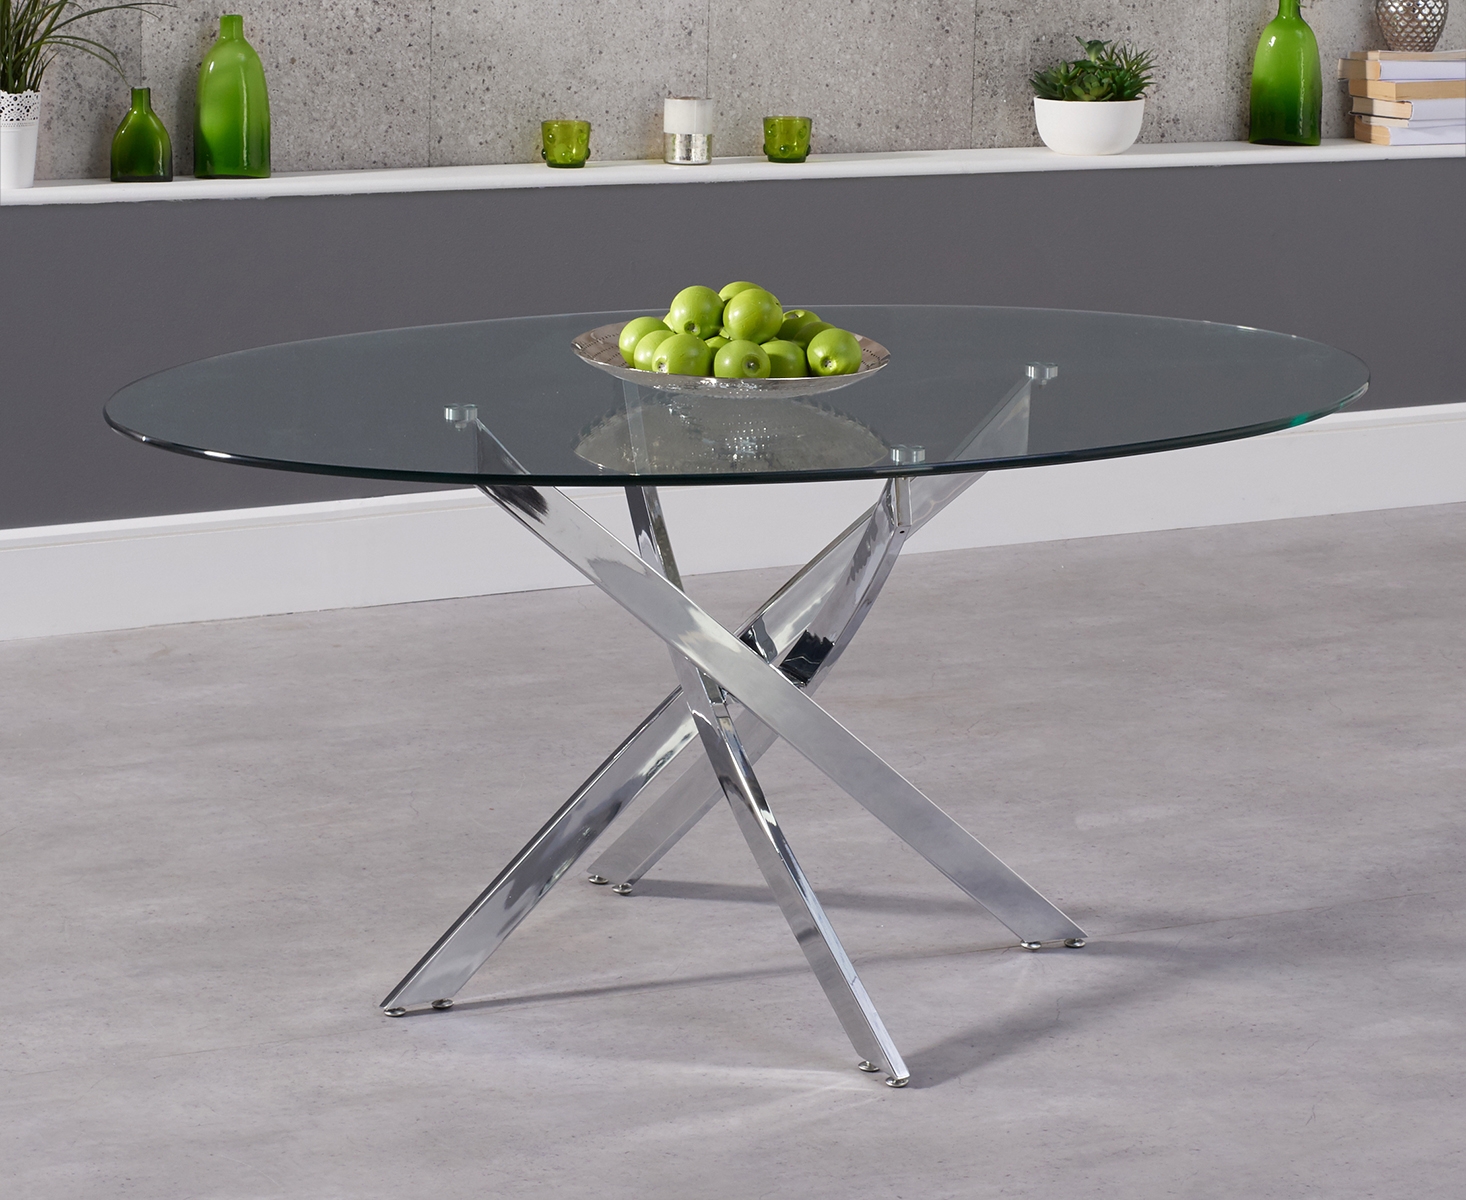 Photo 1 of Bernini 165cm oval glass dining table with 4 grey astrid fabric chairs